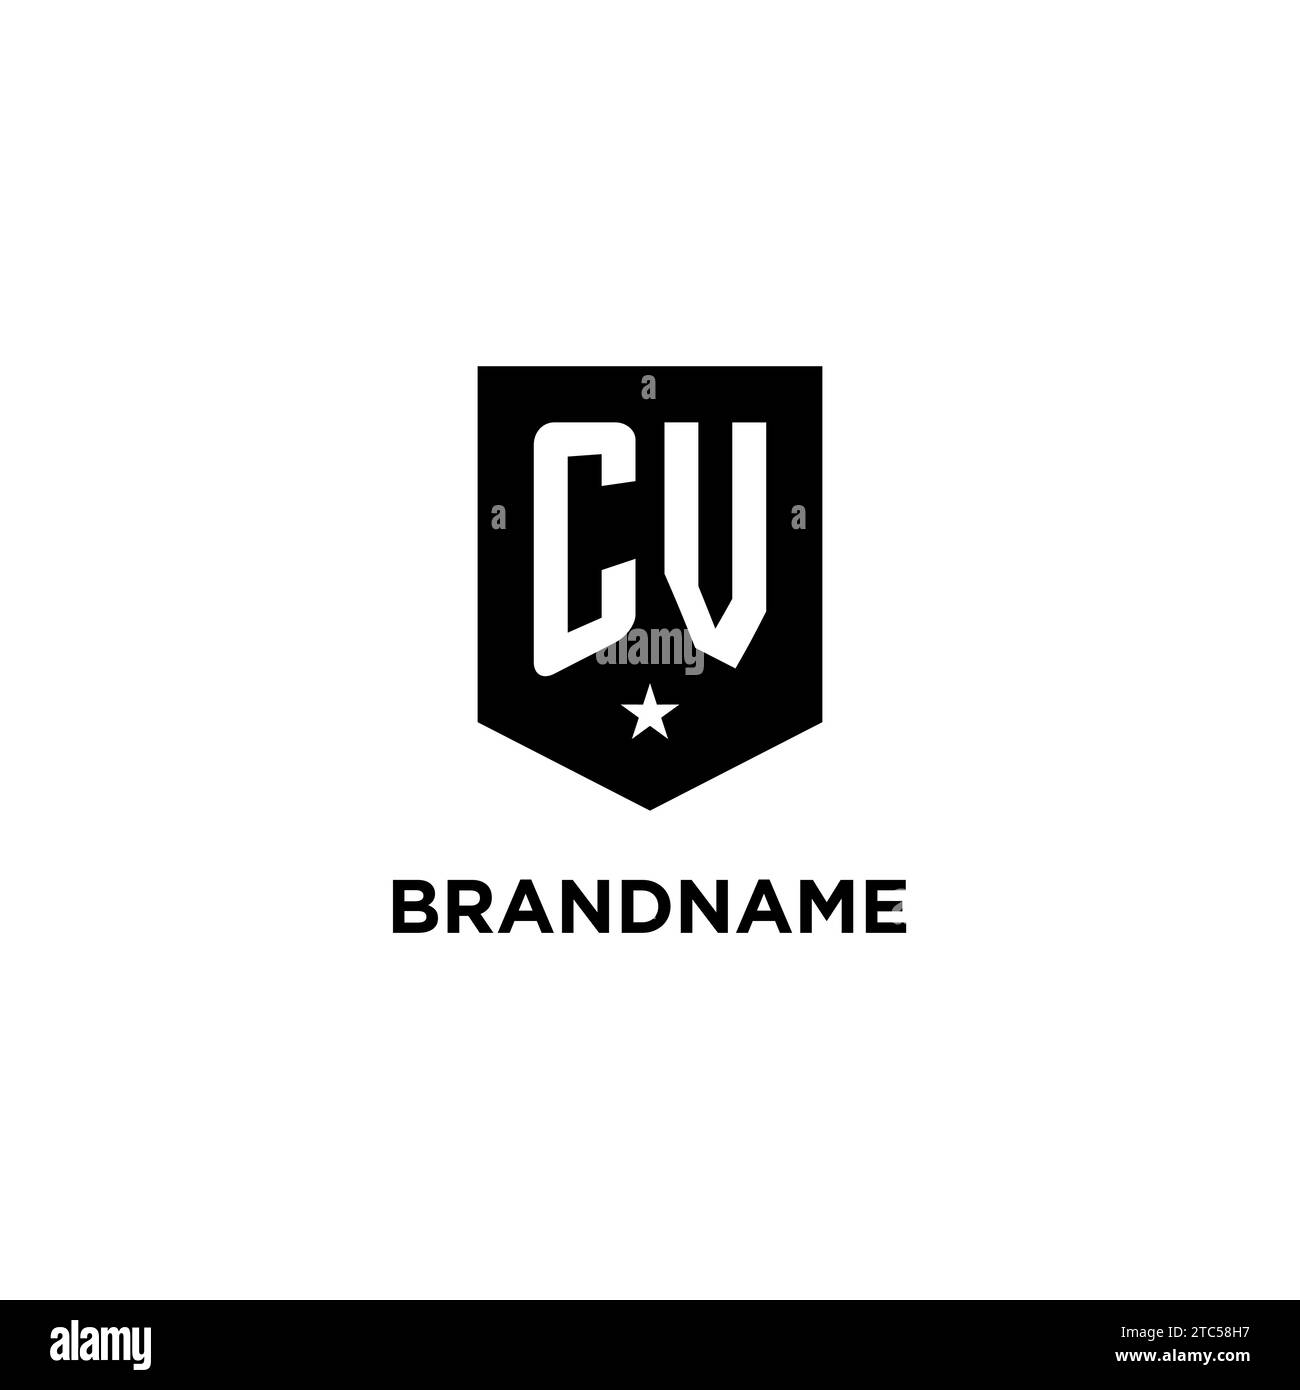 CV monogram initial logo with geometric shield and star icon design style ideas Stock Vector